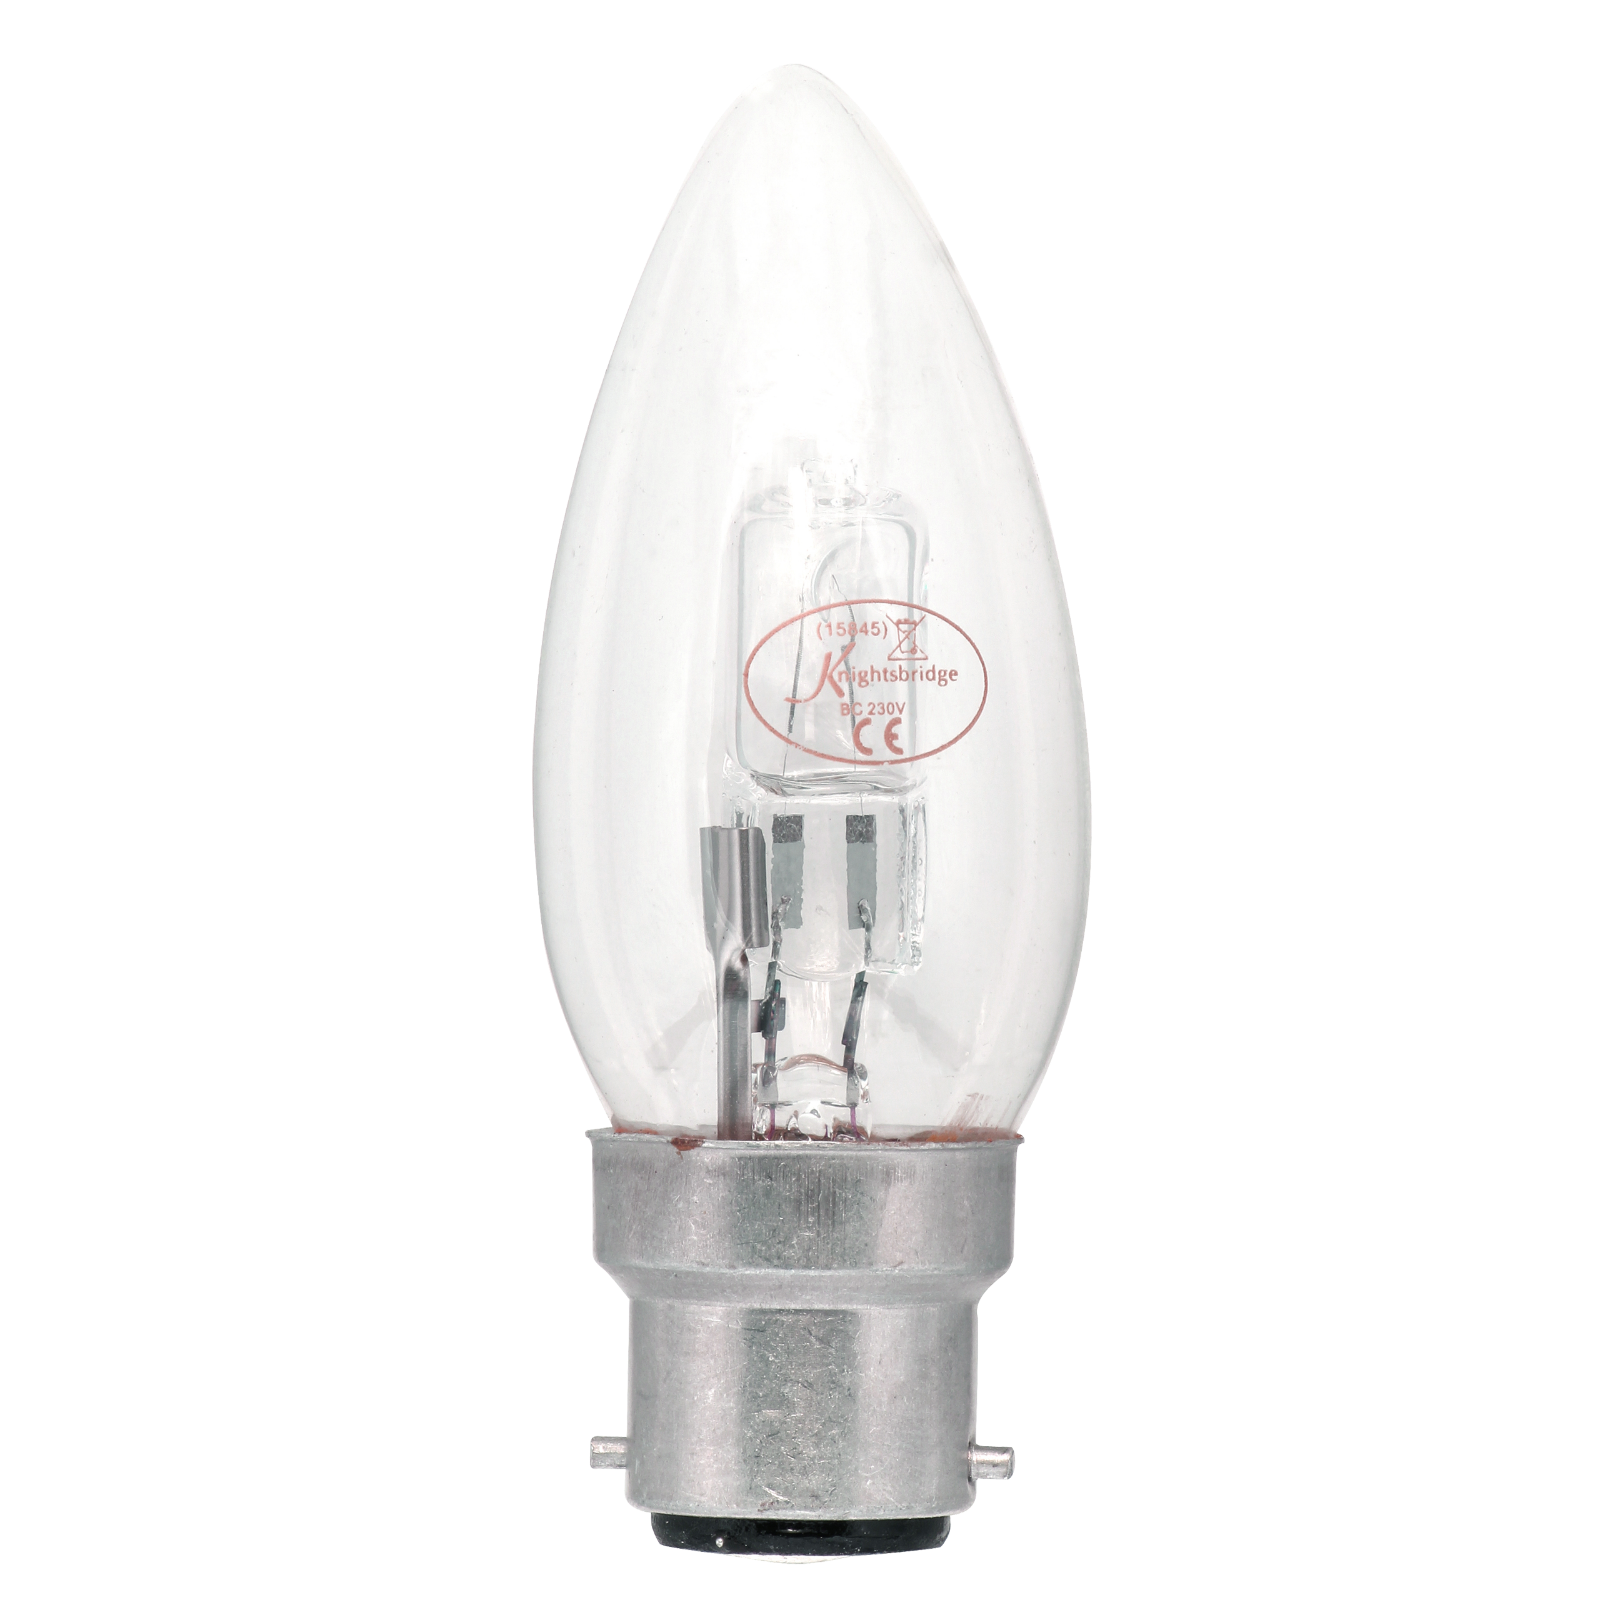 42W Halogen Energy Saving Clear Candle Lamp BC (equivalent To 60W) - HALO-C42BC 